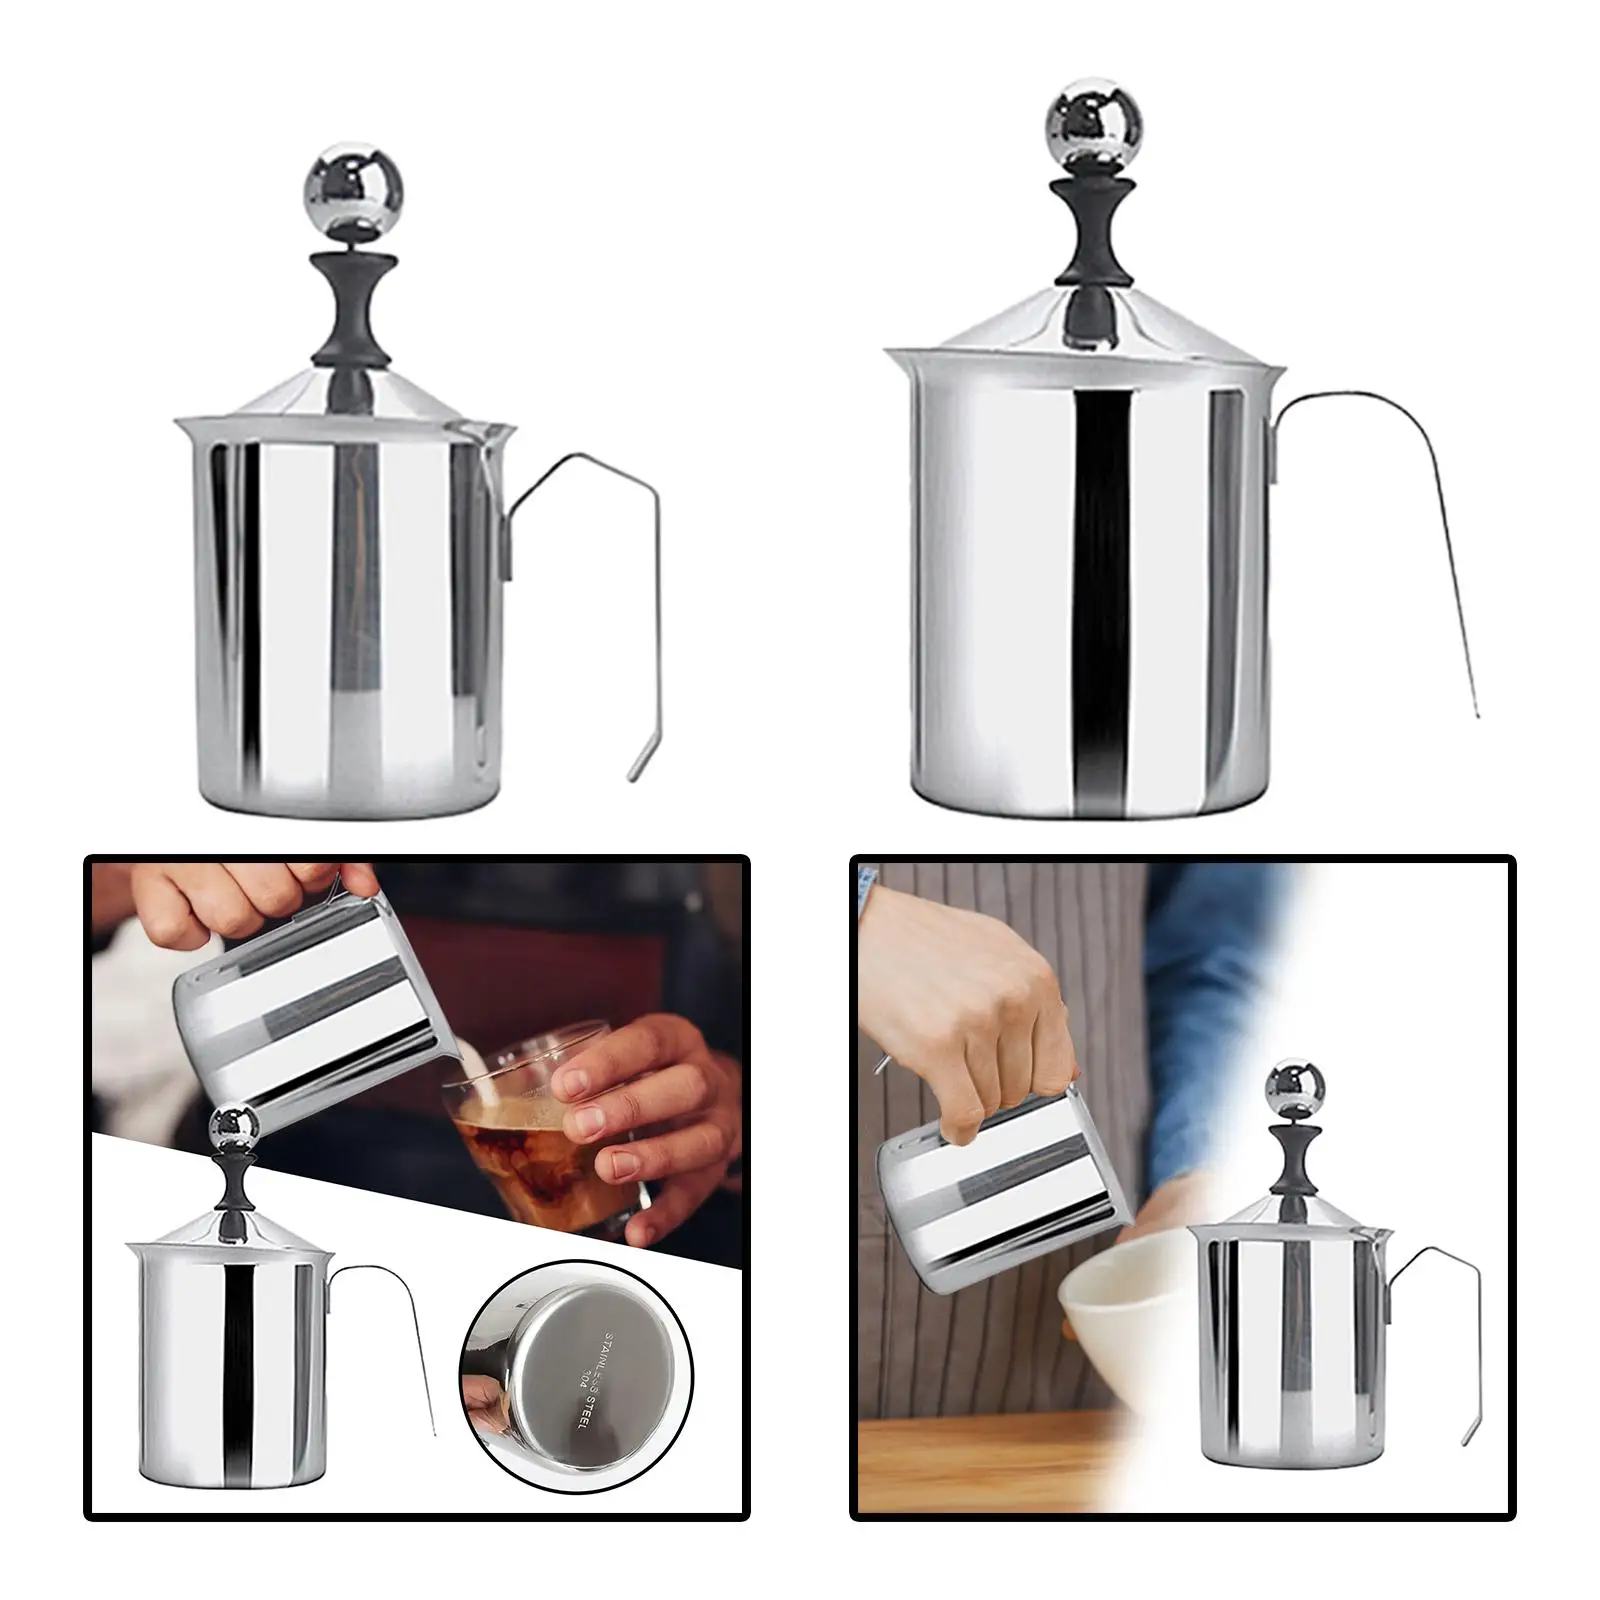 Stainless Steel Manual Milk Frother Coffee Creamer Comfortable Grip Handle Hand Pump Versatile Premium Material Durable with Lid